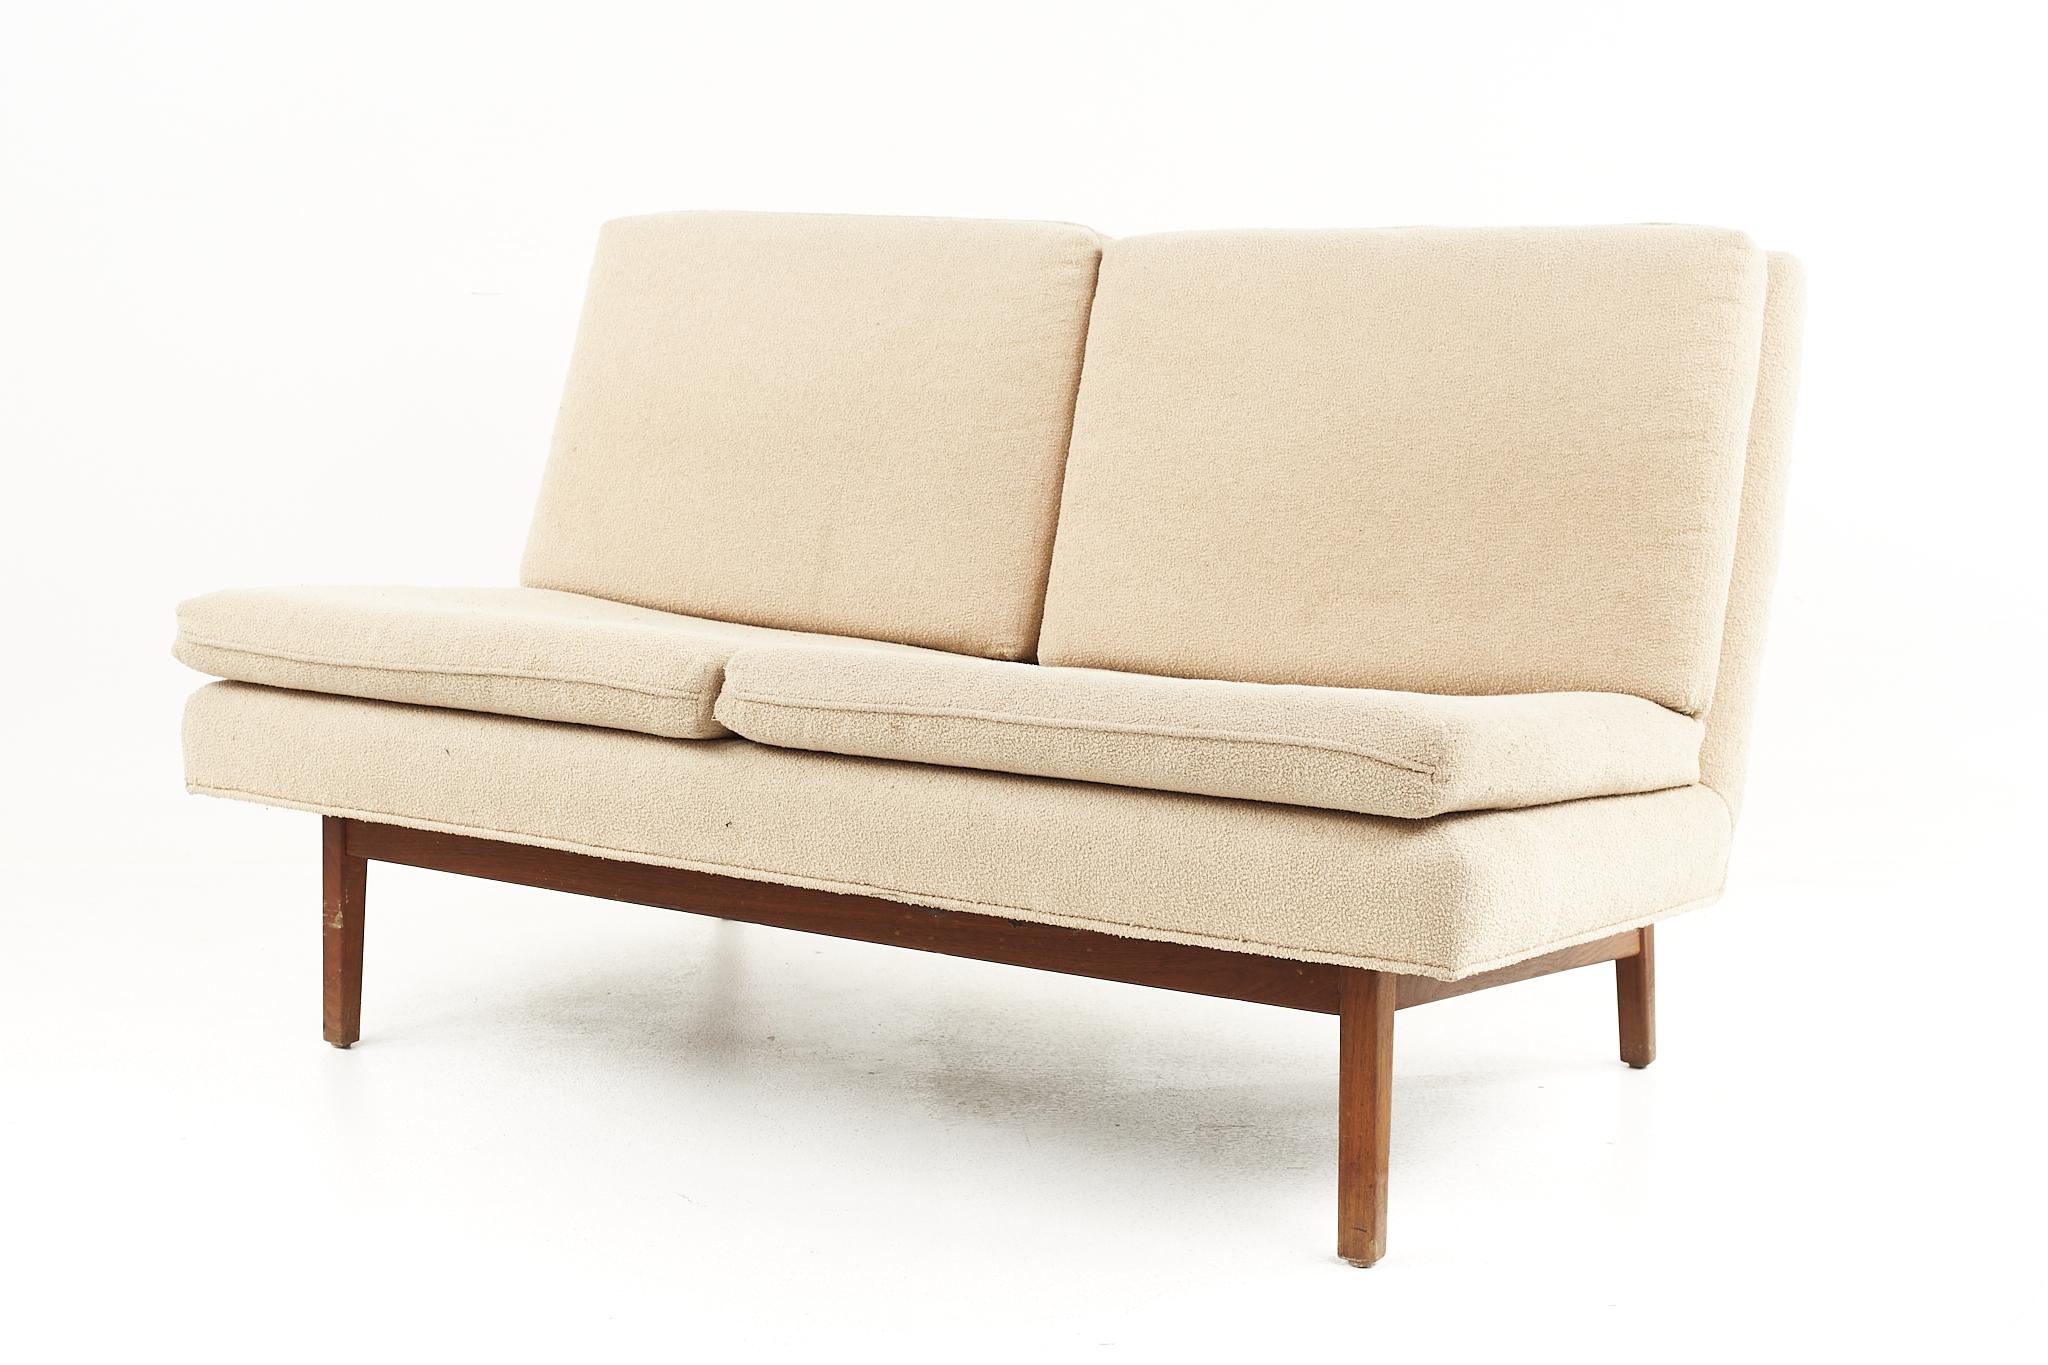 Late 20th Century Jack Cartwright for Founders Mid-Century Walnut Bracket Sofas, a Pair